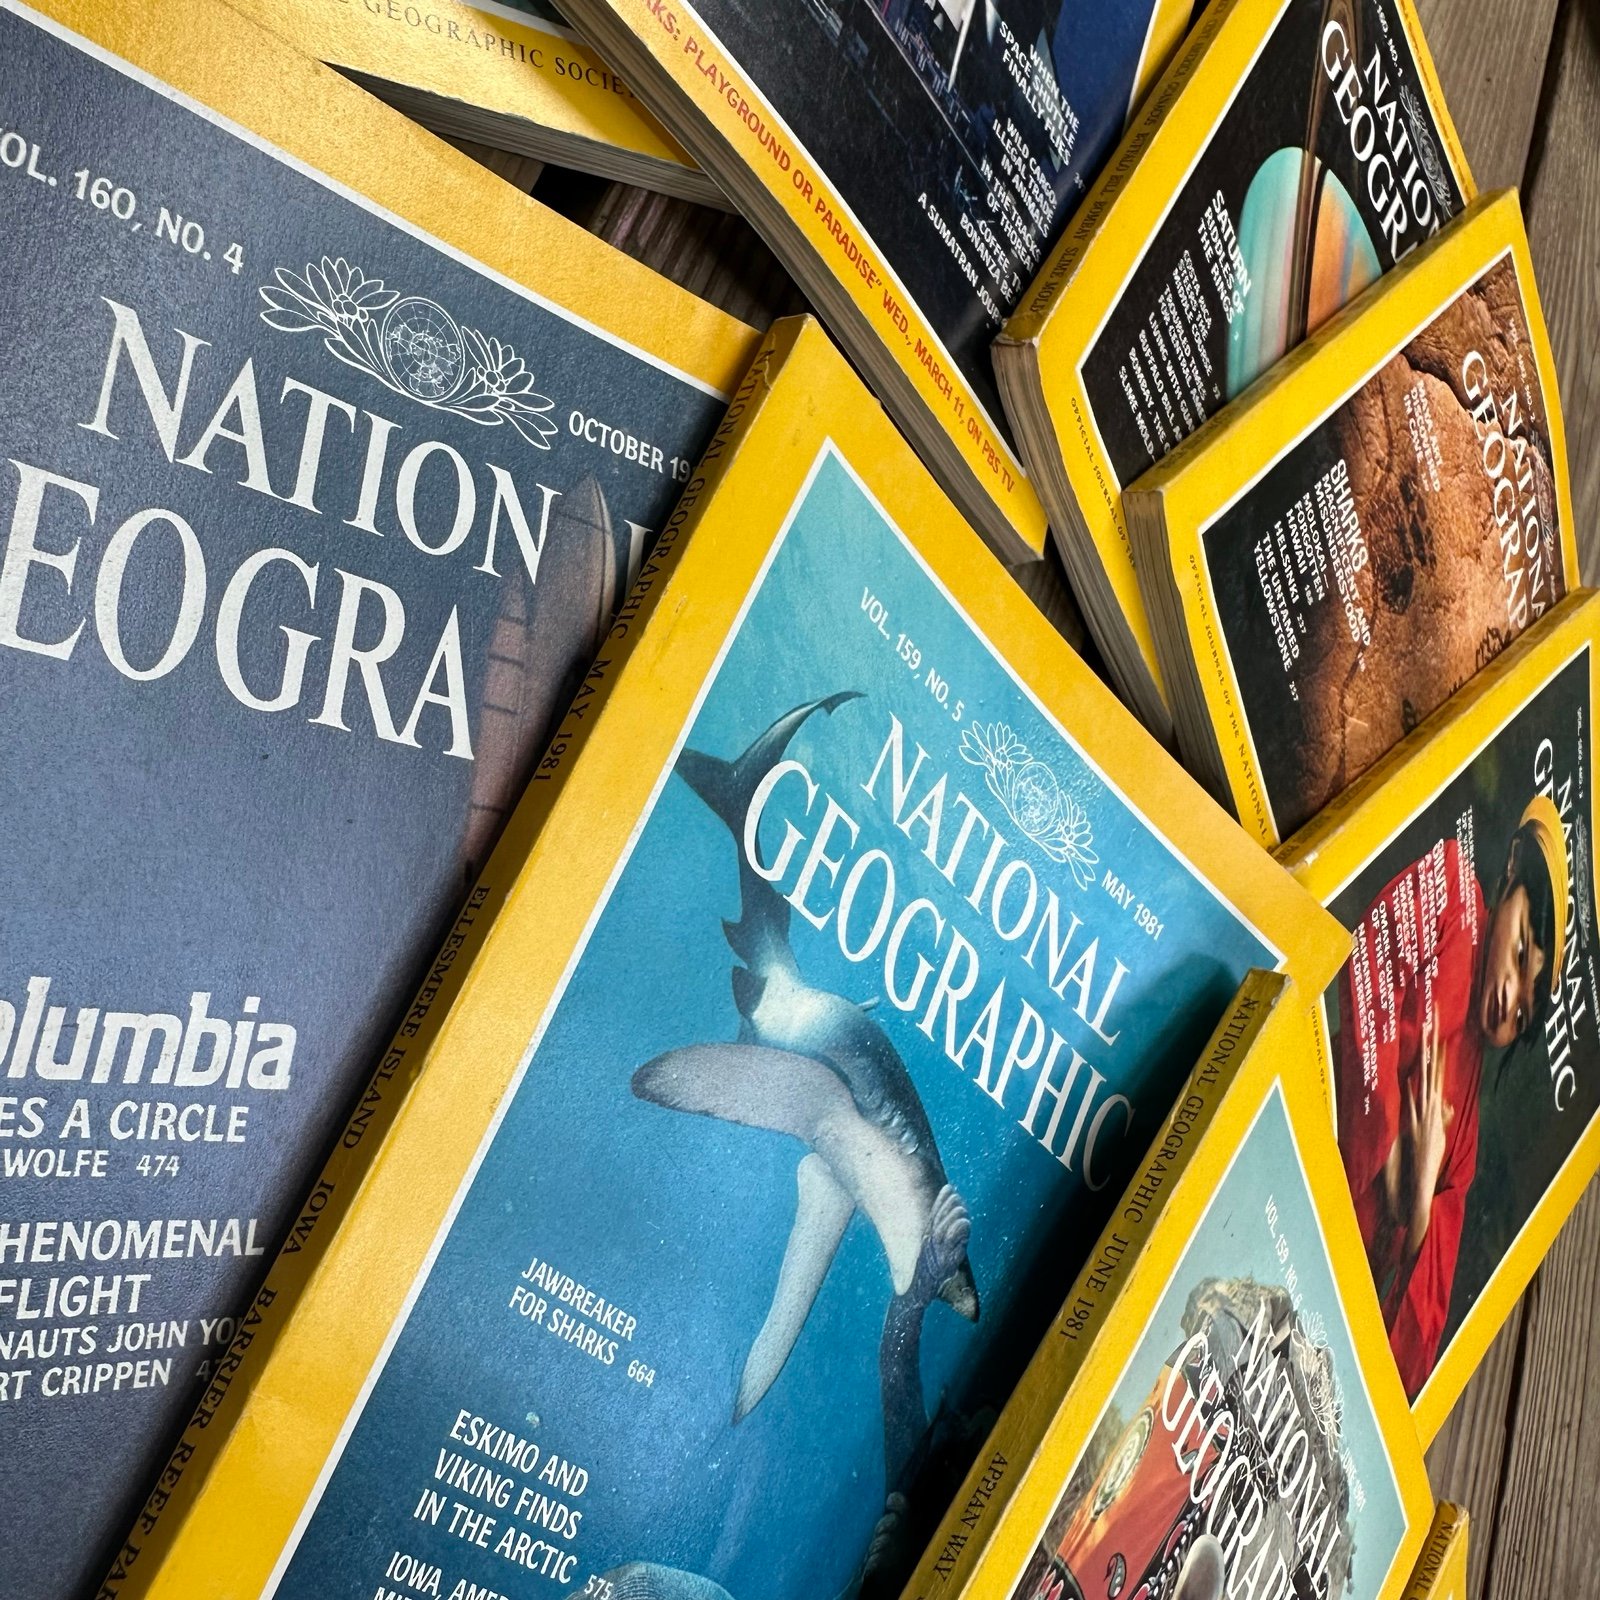 Lot of 9: 1981 National Geographic Magazines Volumes 159, 160 G79vMZjlY